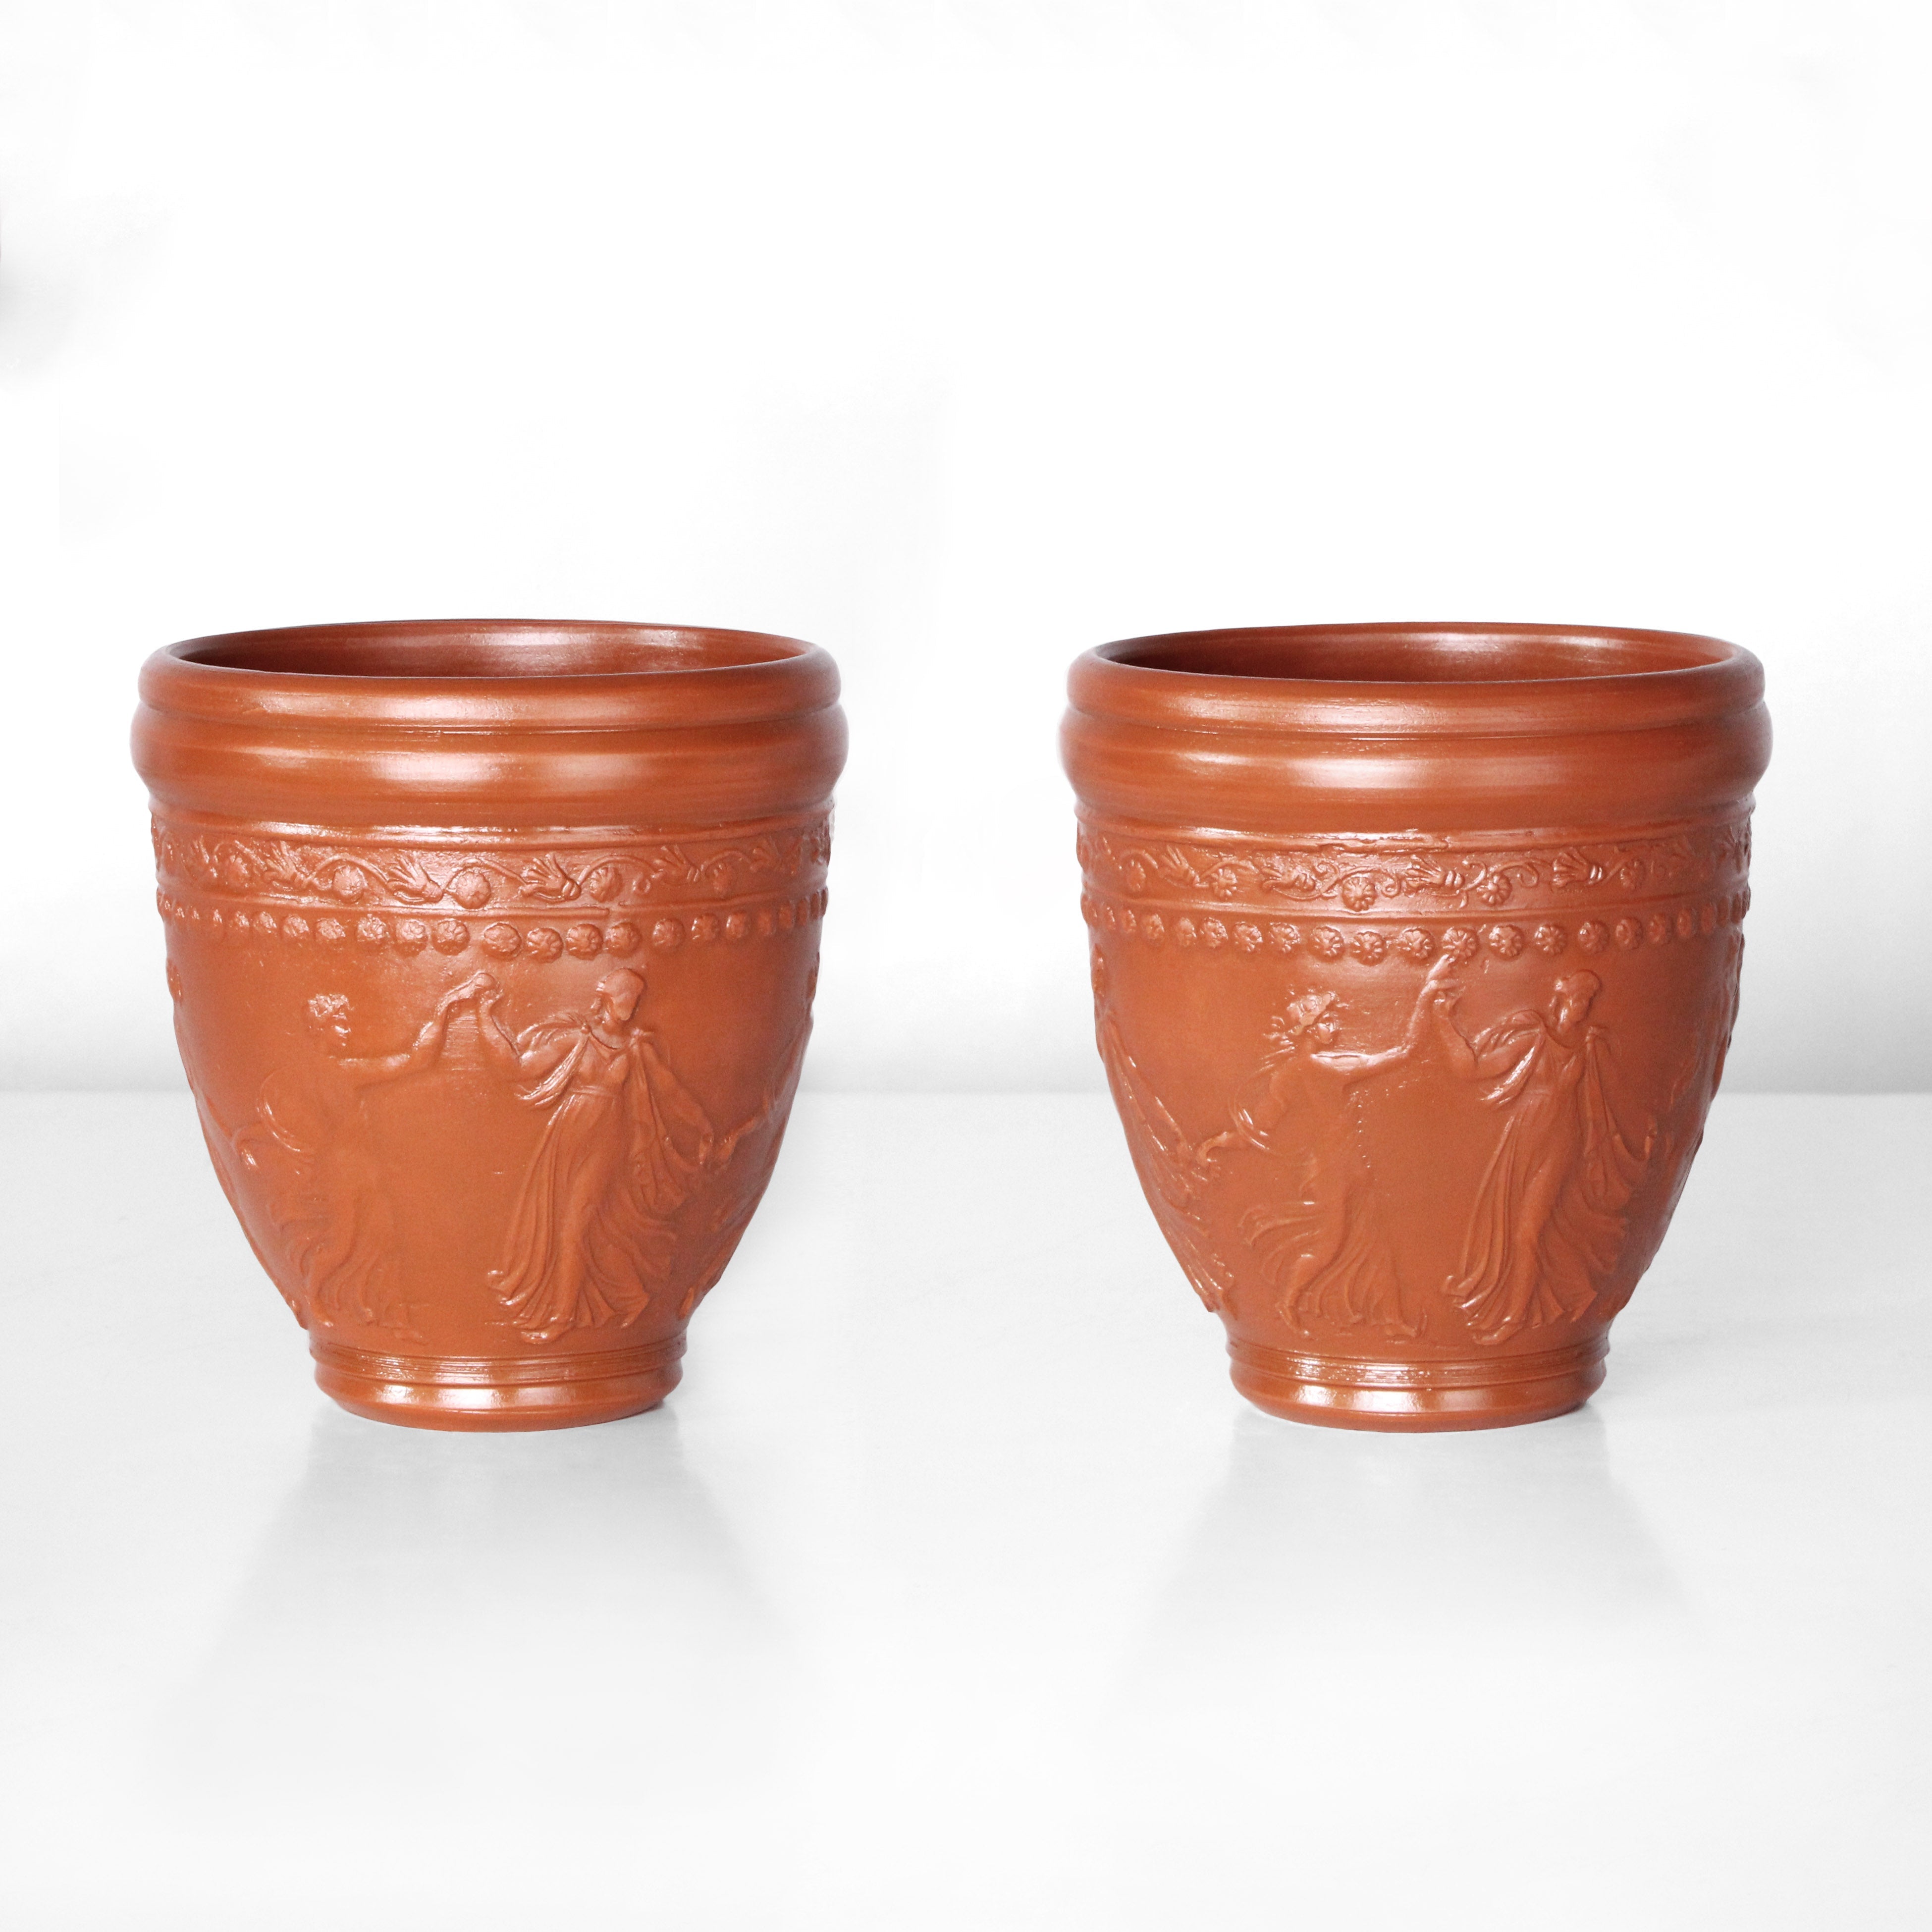 ICM Terracotta Clay Cooker